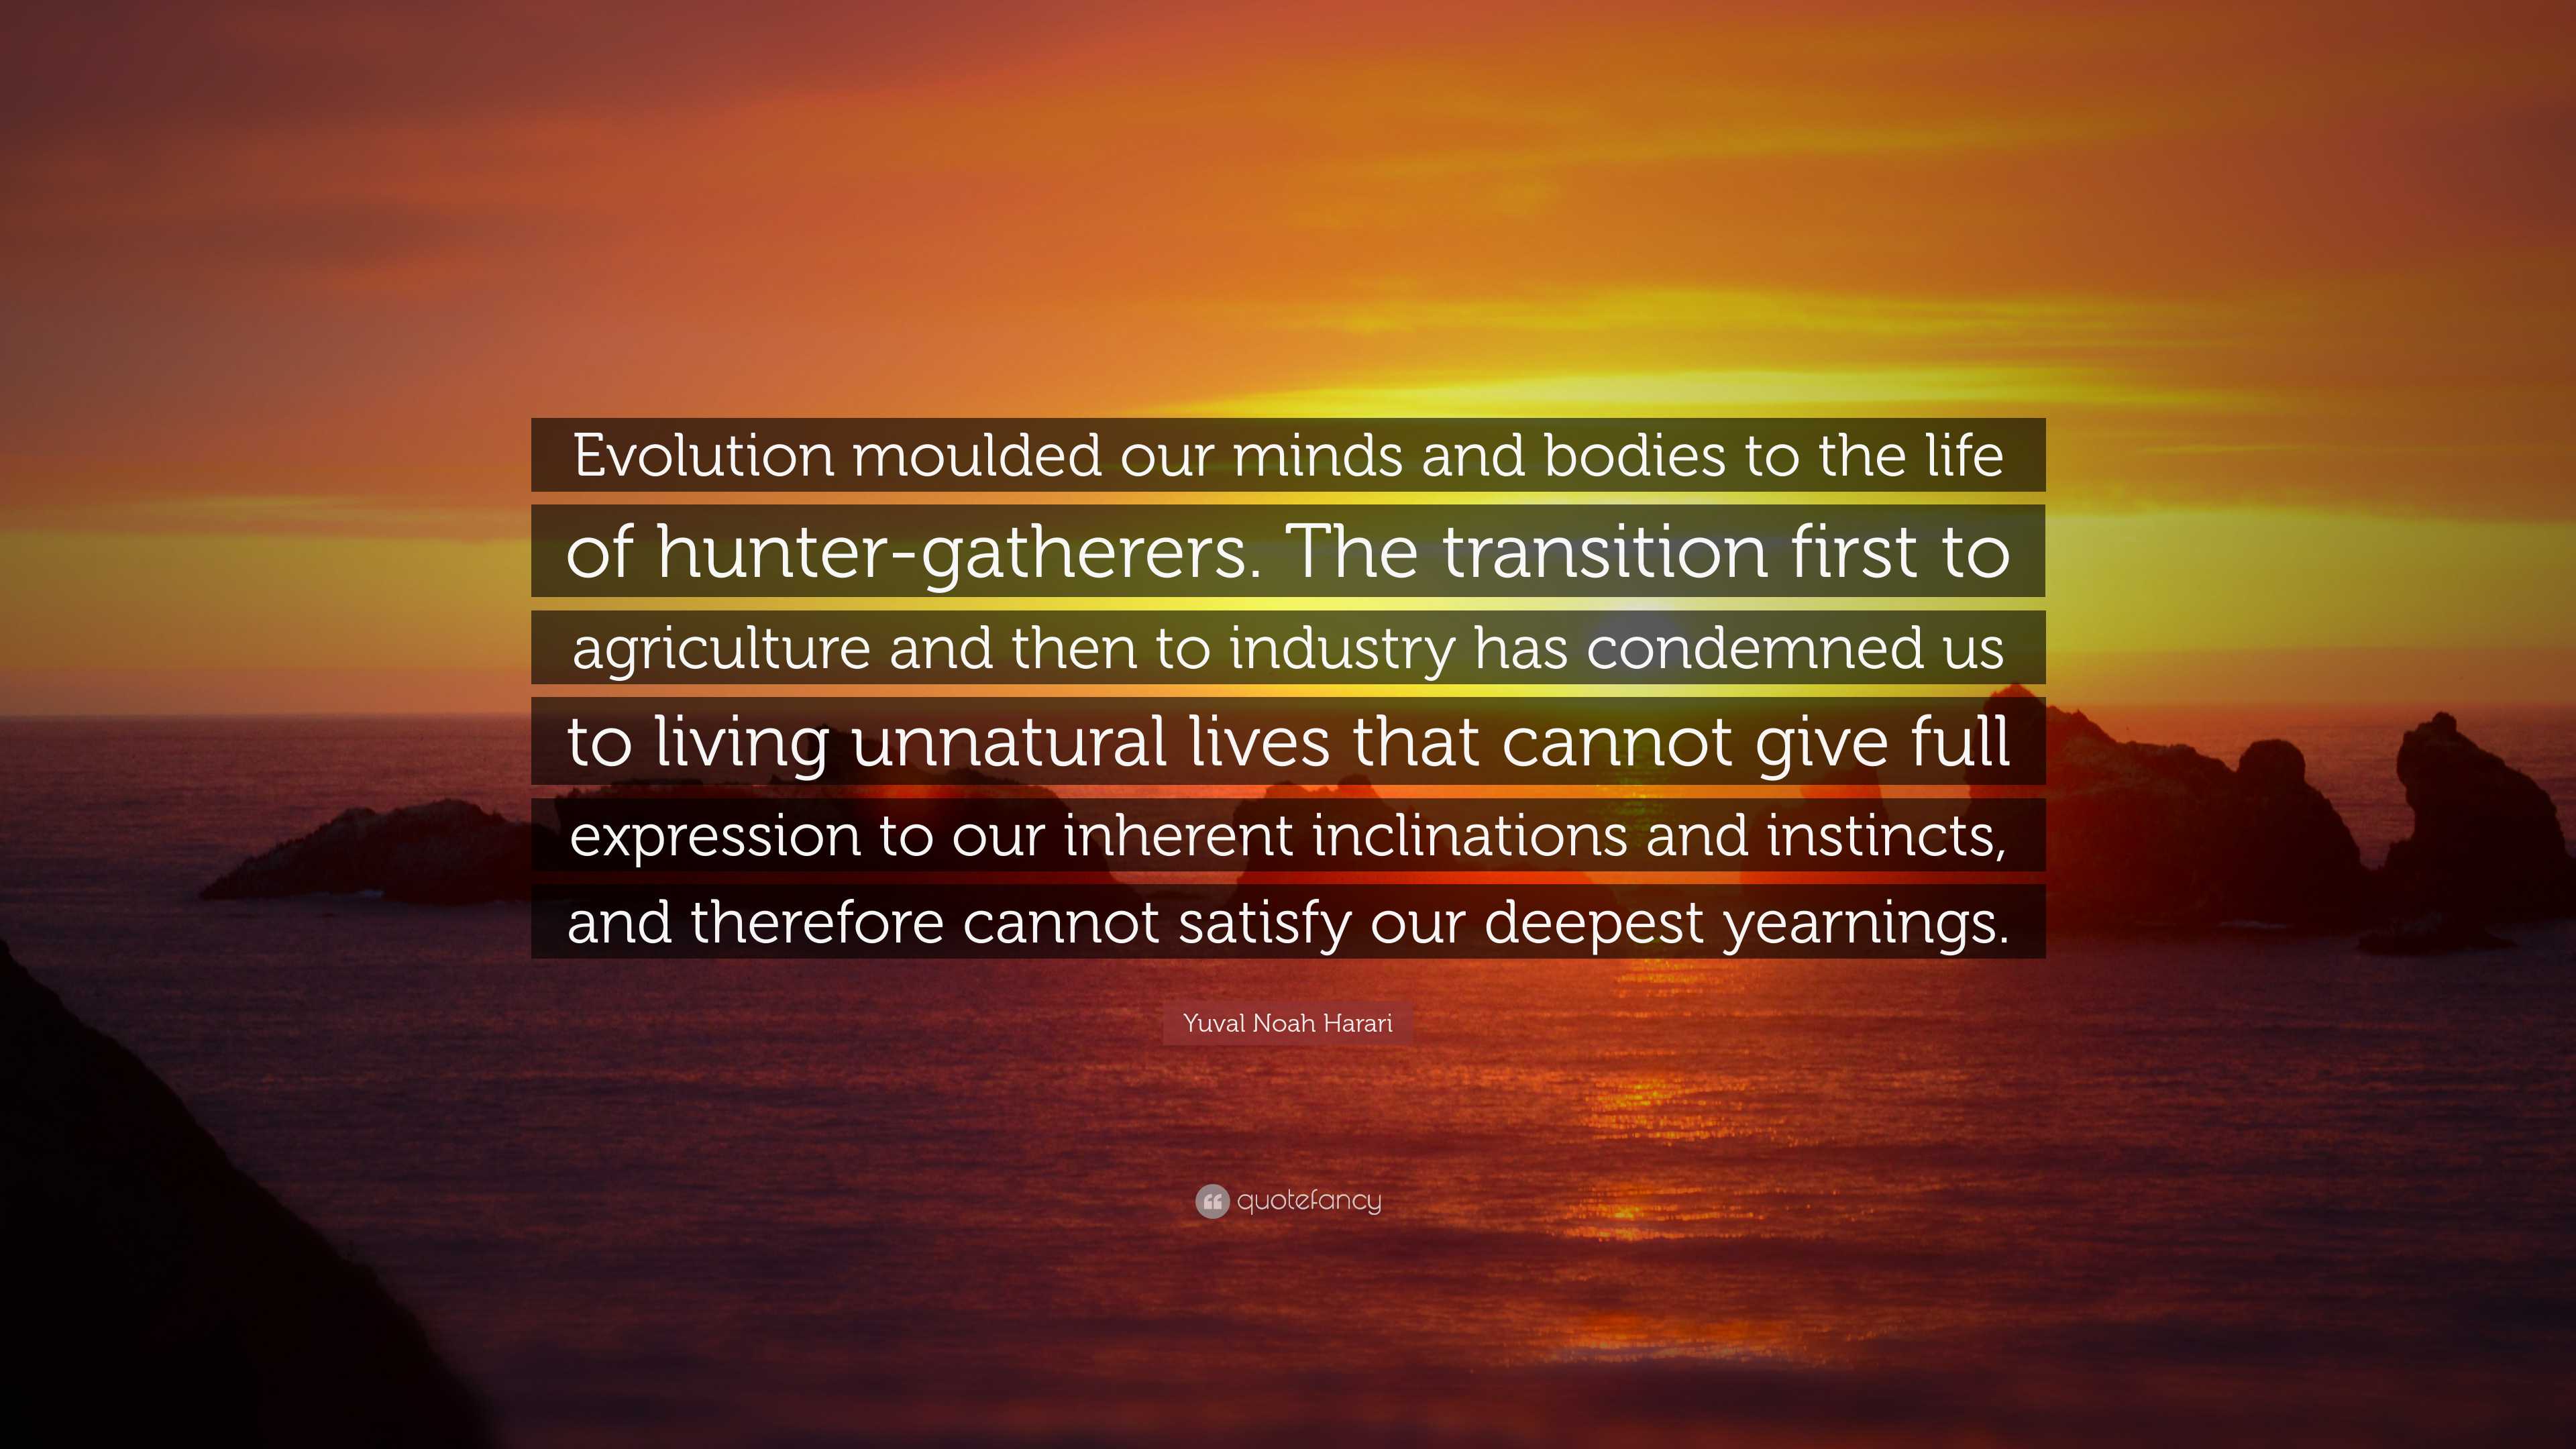 https://quotefancy.com/media/wallpaper/3840x2160/8131482-Yuval-Noah-Harari-Quote-Evolution-moulded-our-minds-and-bodies-to-the-life-of-hunter.jpg